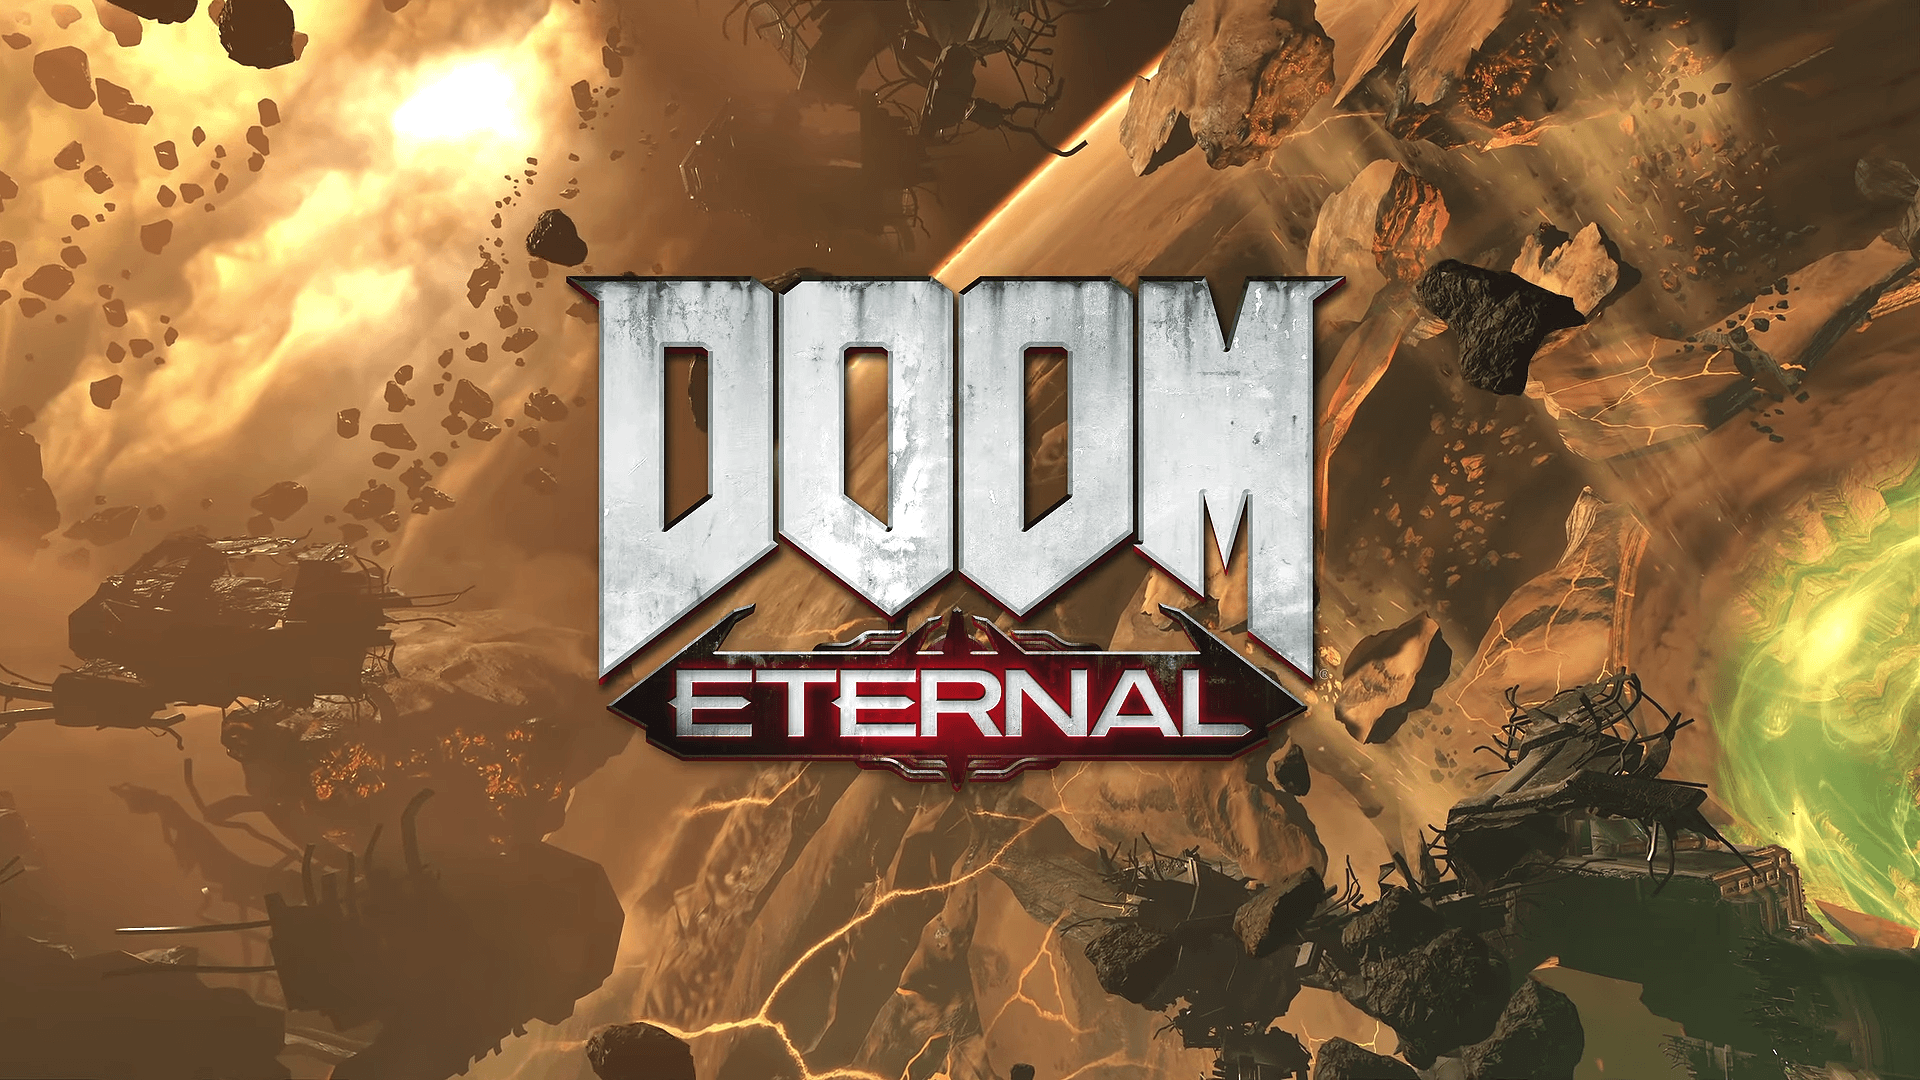 Wallpaper shot from the GDC Doom Eternal event if anyone